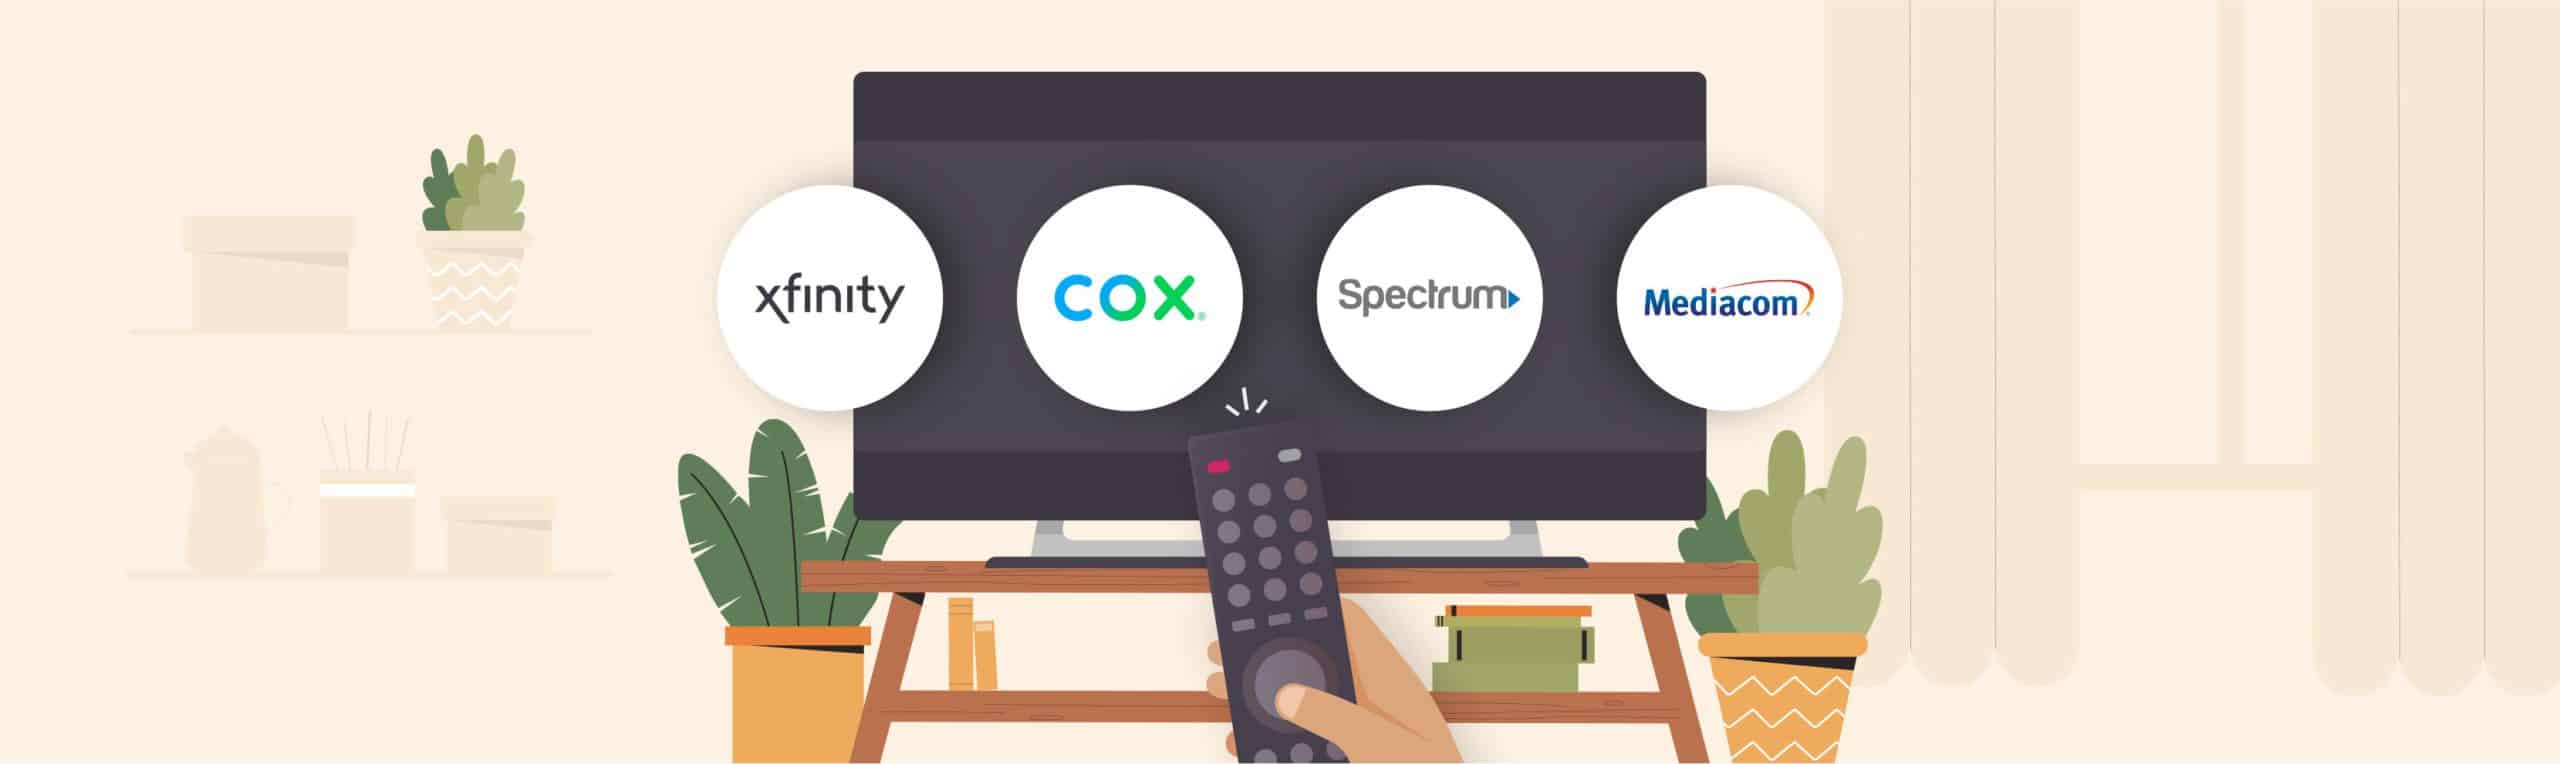 Cable TV Buyer's Guide Hero